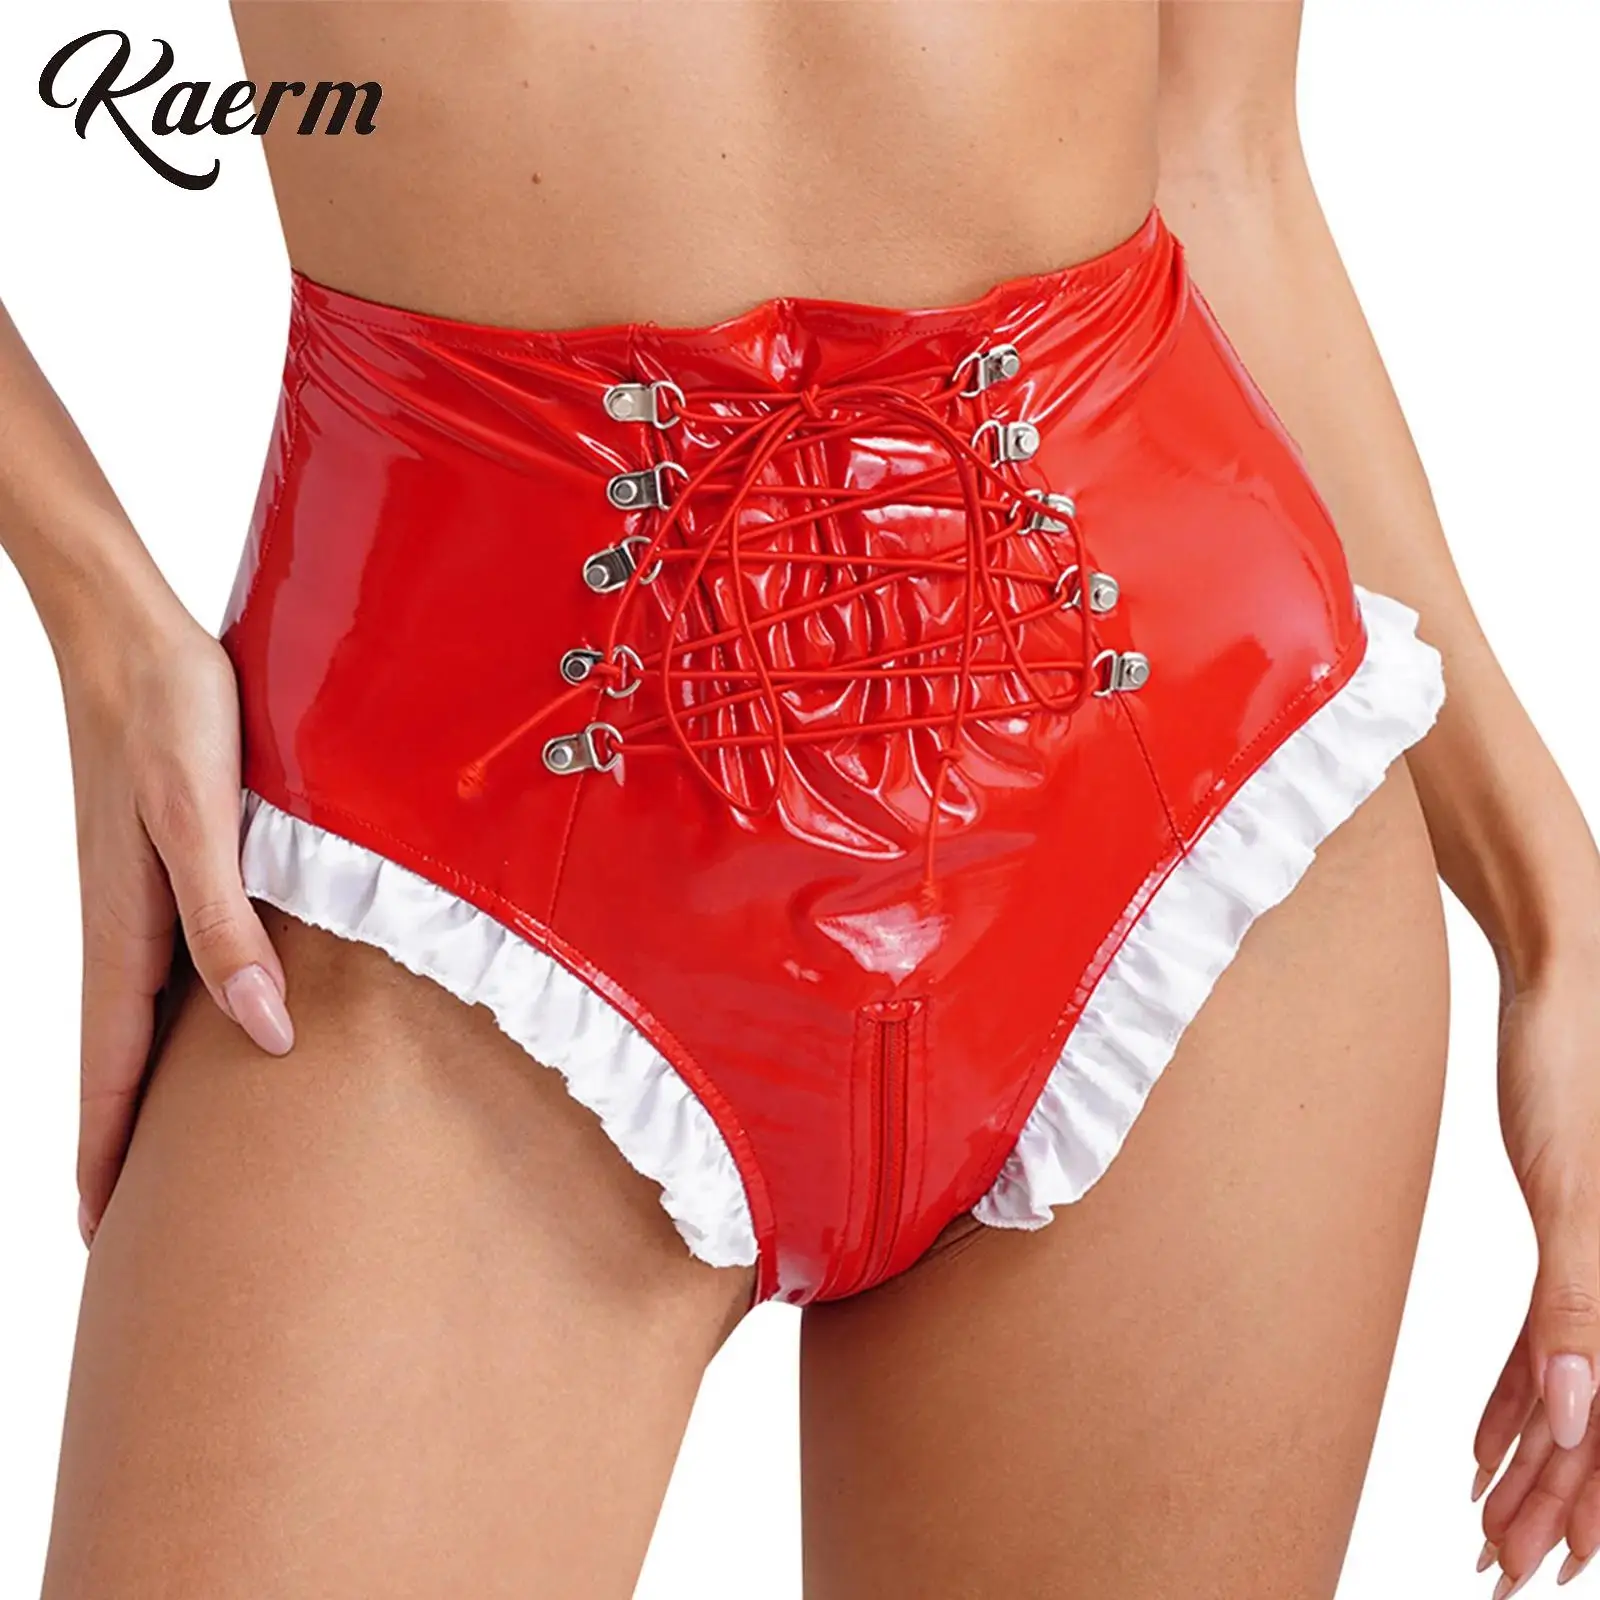 

Womens Glossy Patent Leather Underwear Frilly Maid Knickers High Waist Lace-up Zipper Crotch Underpants Sexy Briefs Lingerie